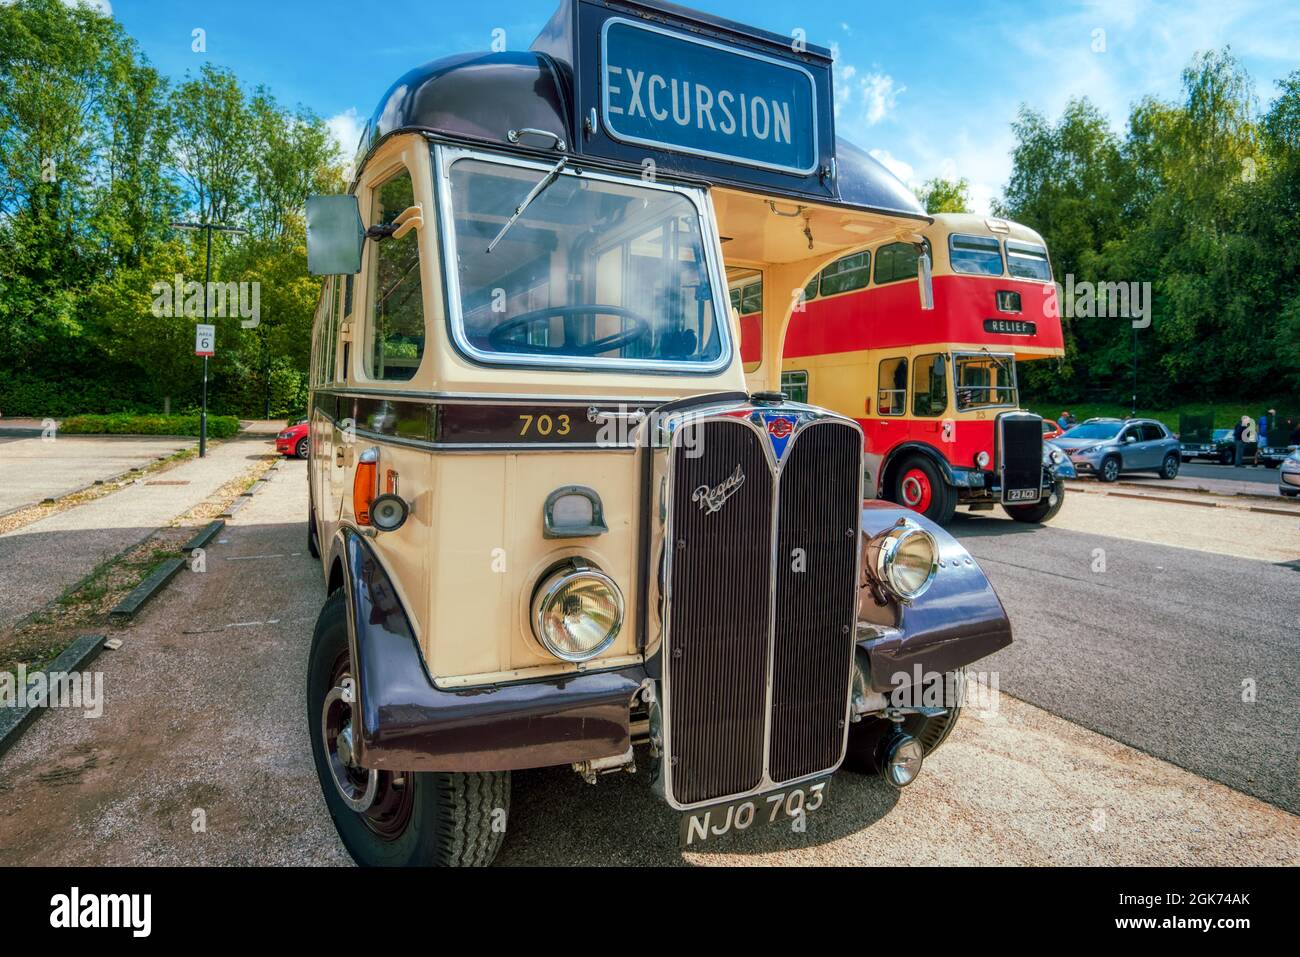 Charabanc outing. A classic old excursion tour bus, Winchester, UK, Stock Photo